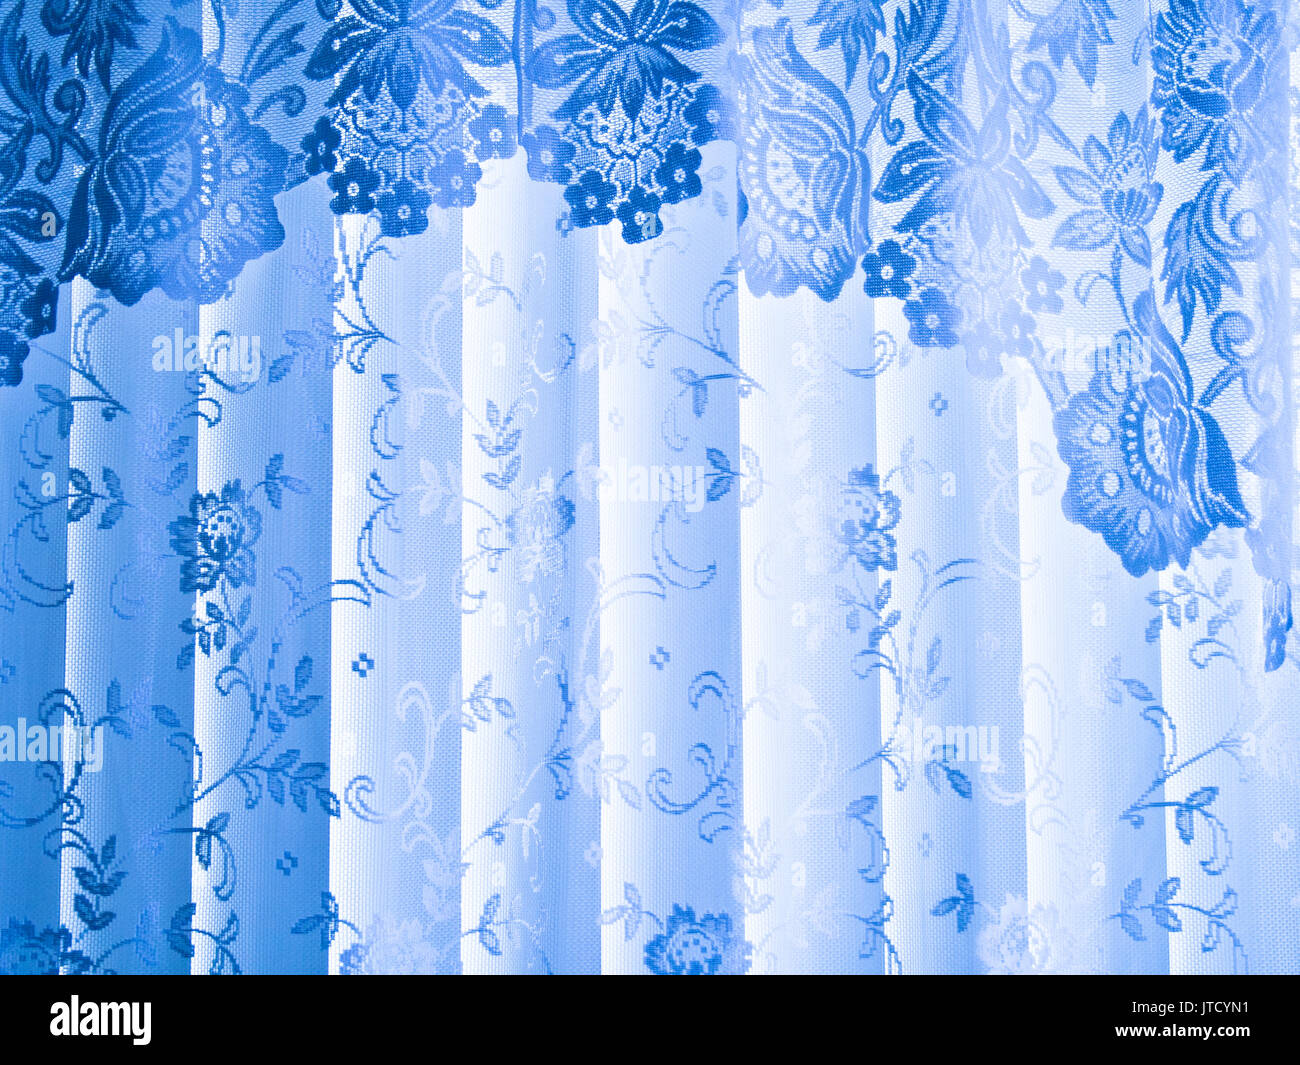 Soft, lacy folds of a light blue curtain are topped with a swag valance. Stock Photo